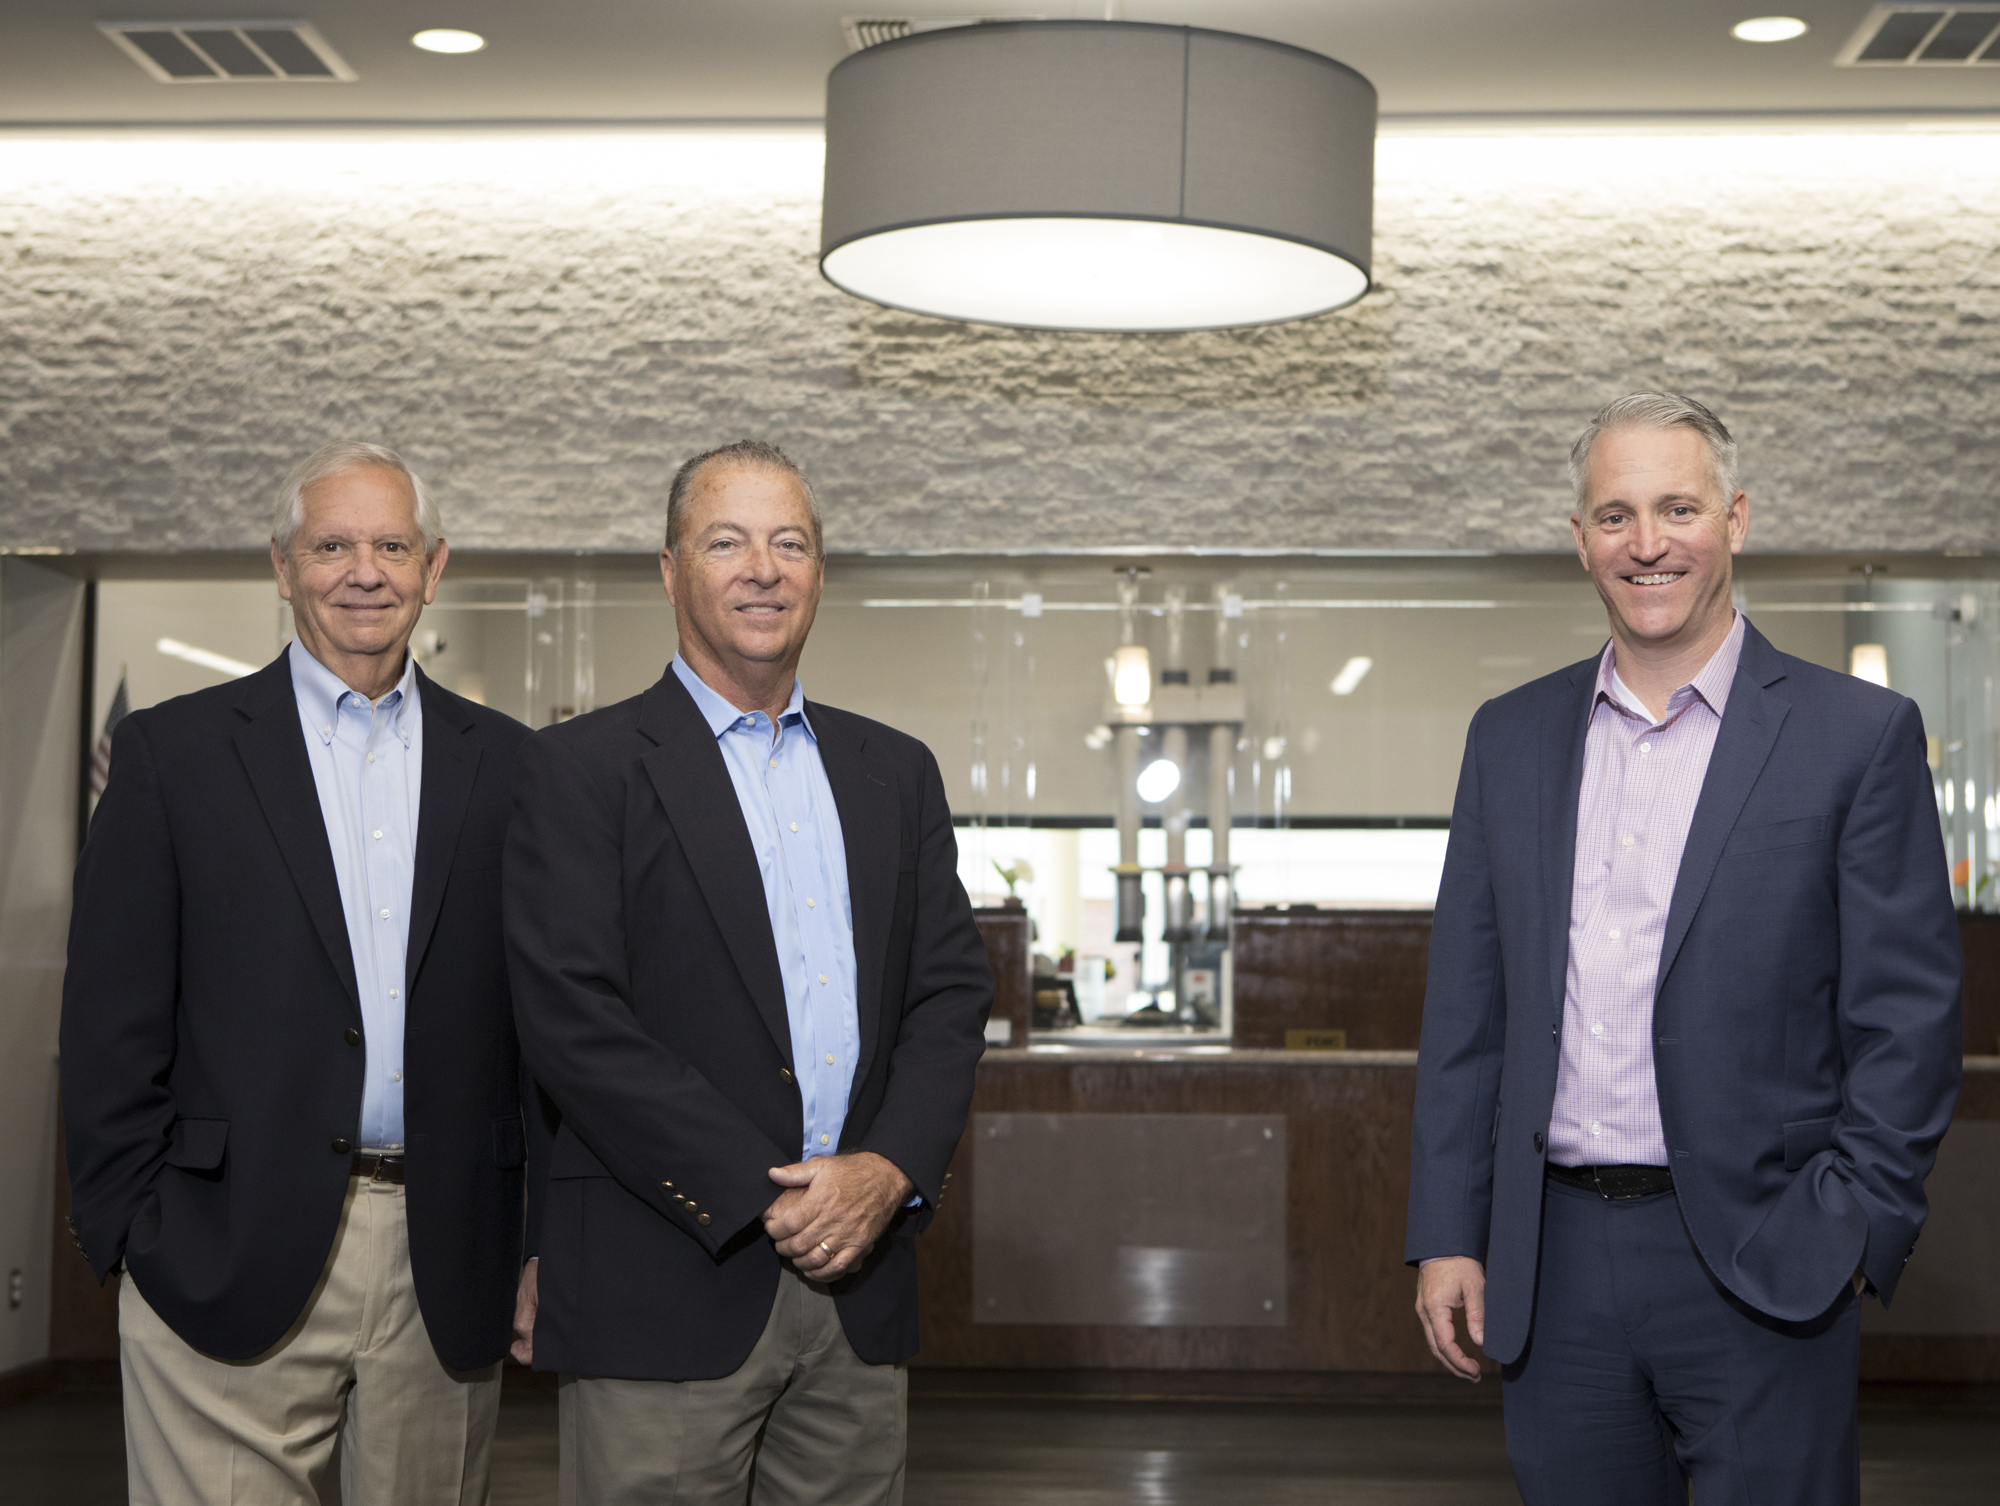 The Bank of Tampa's Bill West, left, and Corey Neil, far right, are looking forward to the merger with Hillsboro Bank, overseen by Mike Ward, middle.